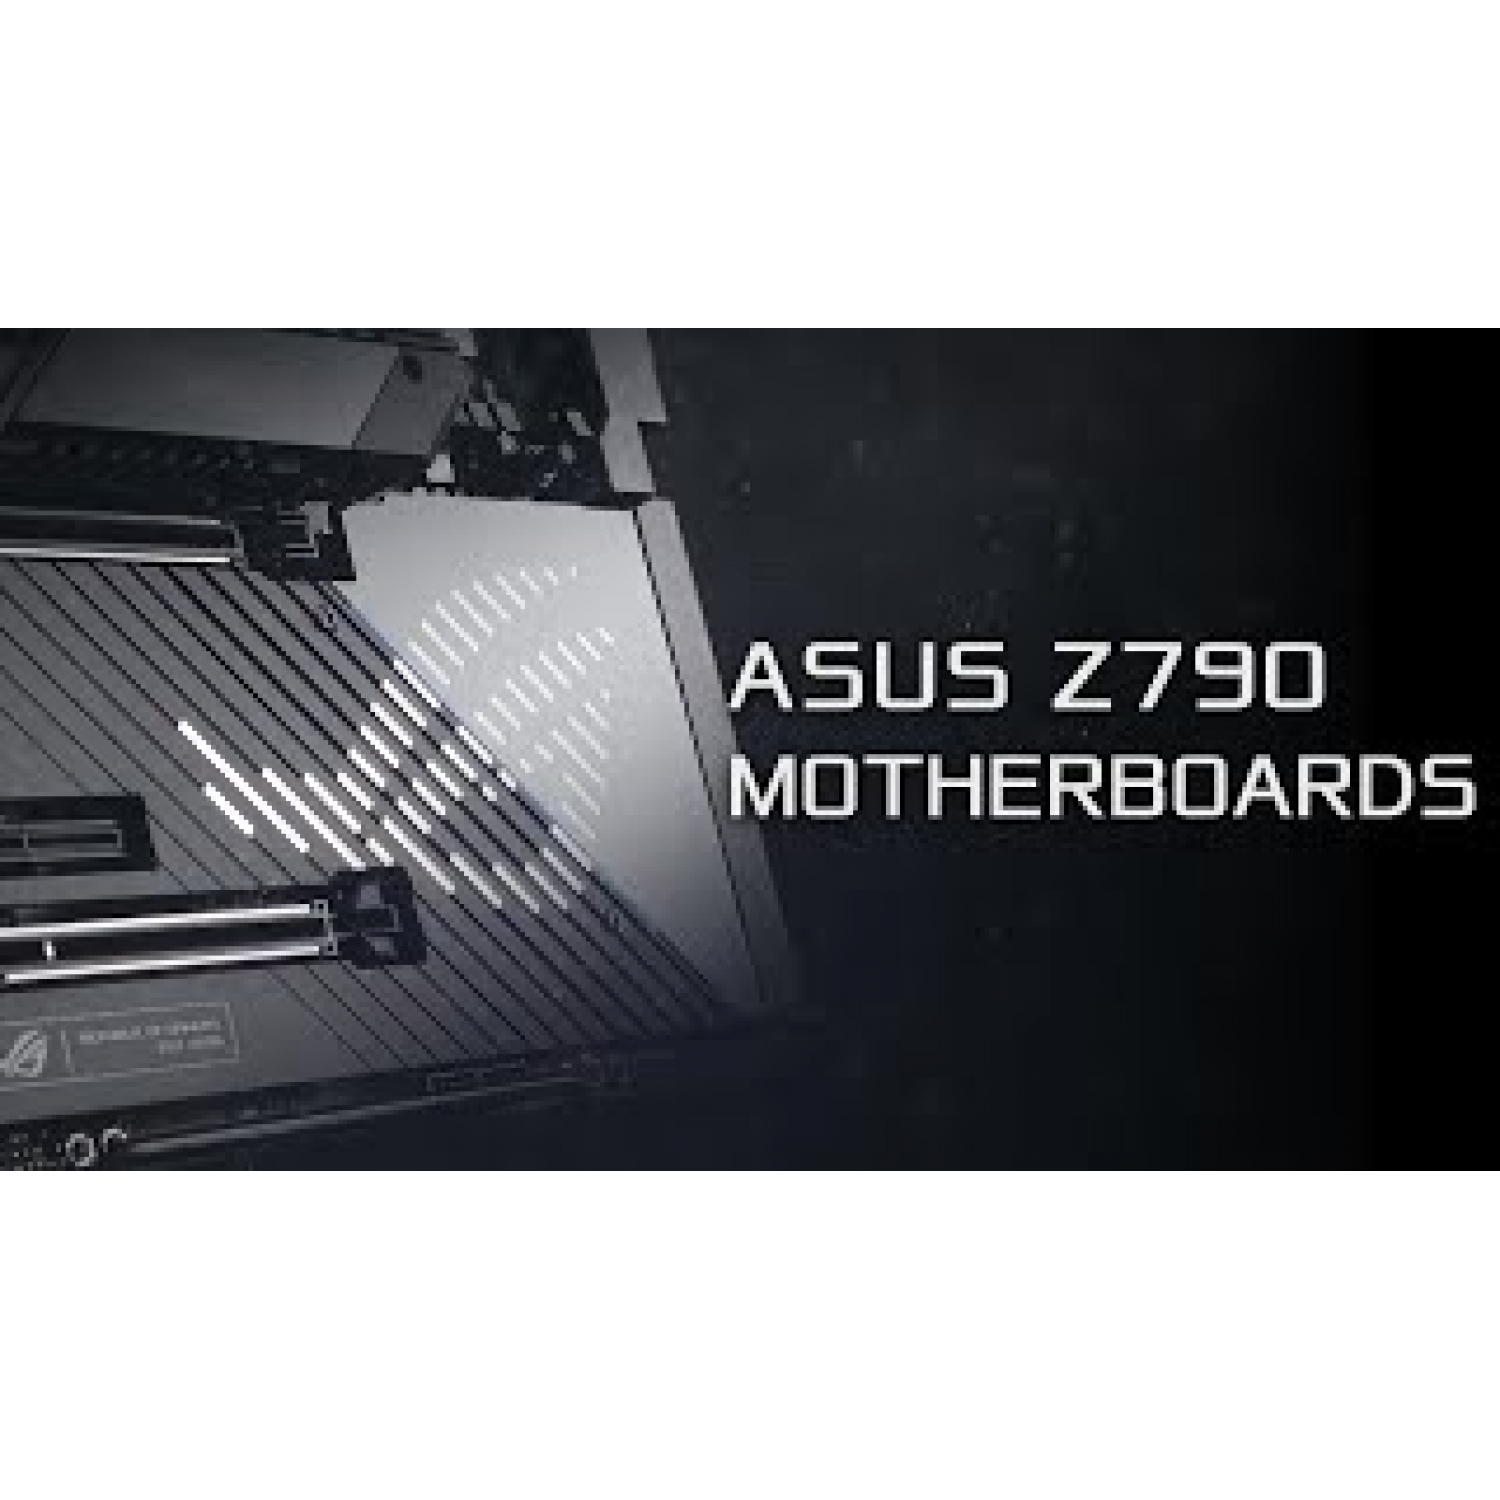 ASUS Z790 Motherboards - Reign Supreme | Best Motherboard for 13th Gen Intel® Core™ Processors